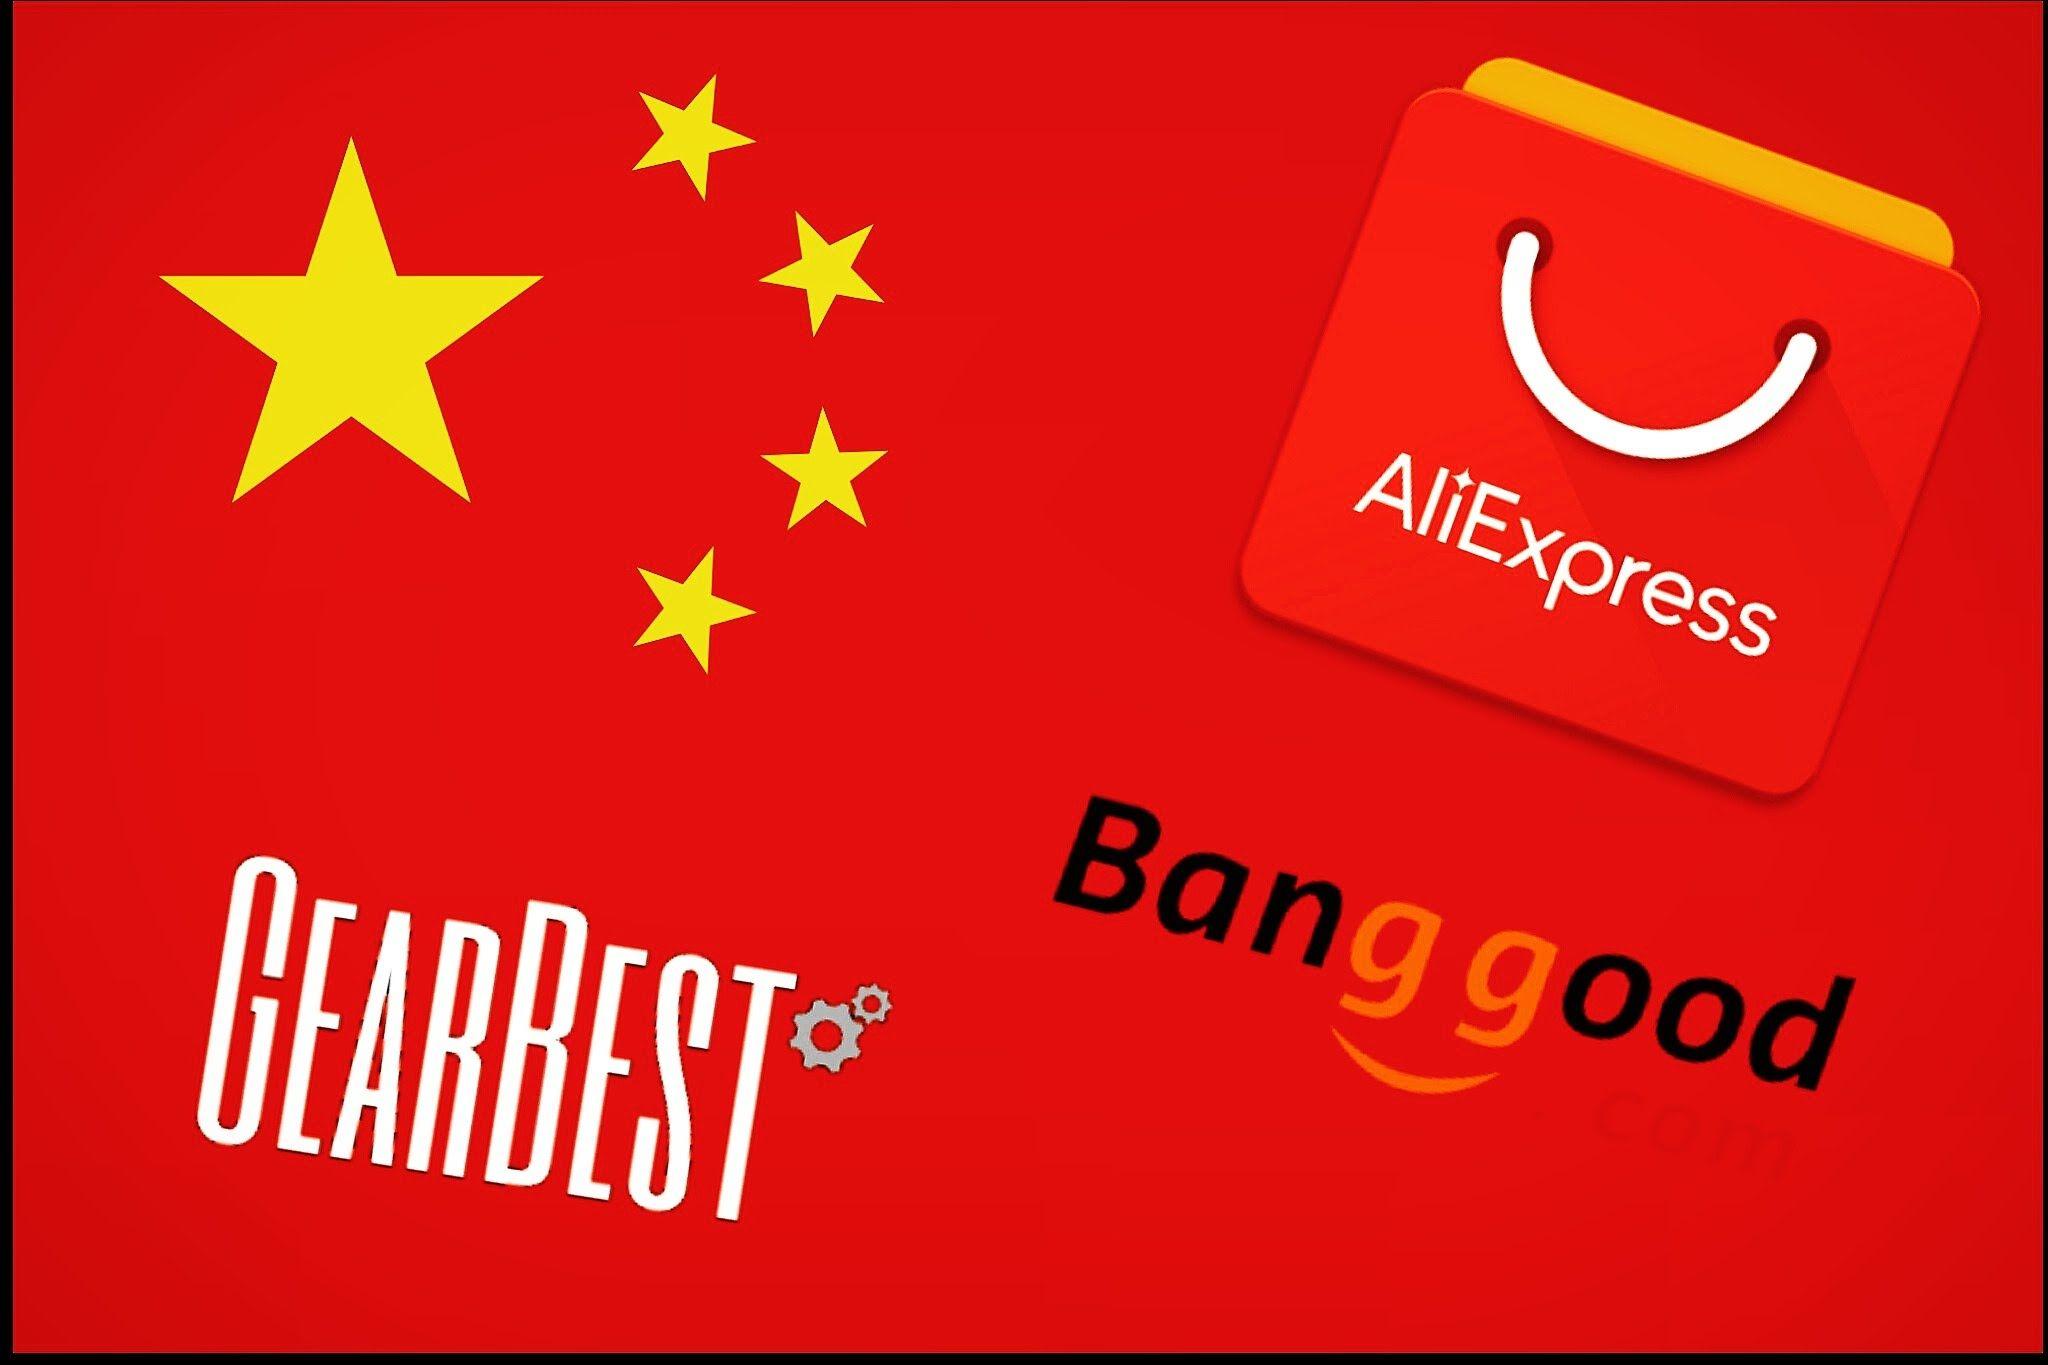 Gear Best Logo - How to buy Chinese Smartphones from Gearbest, Banggood, and ...